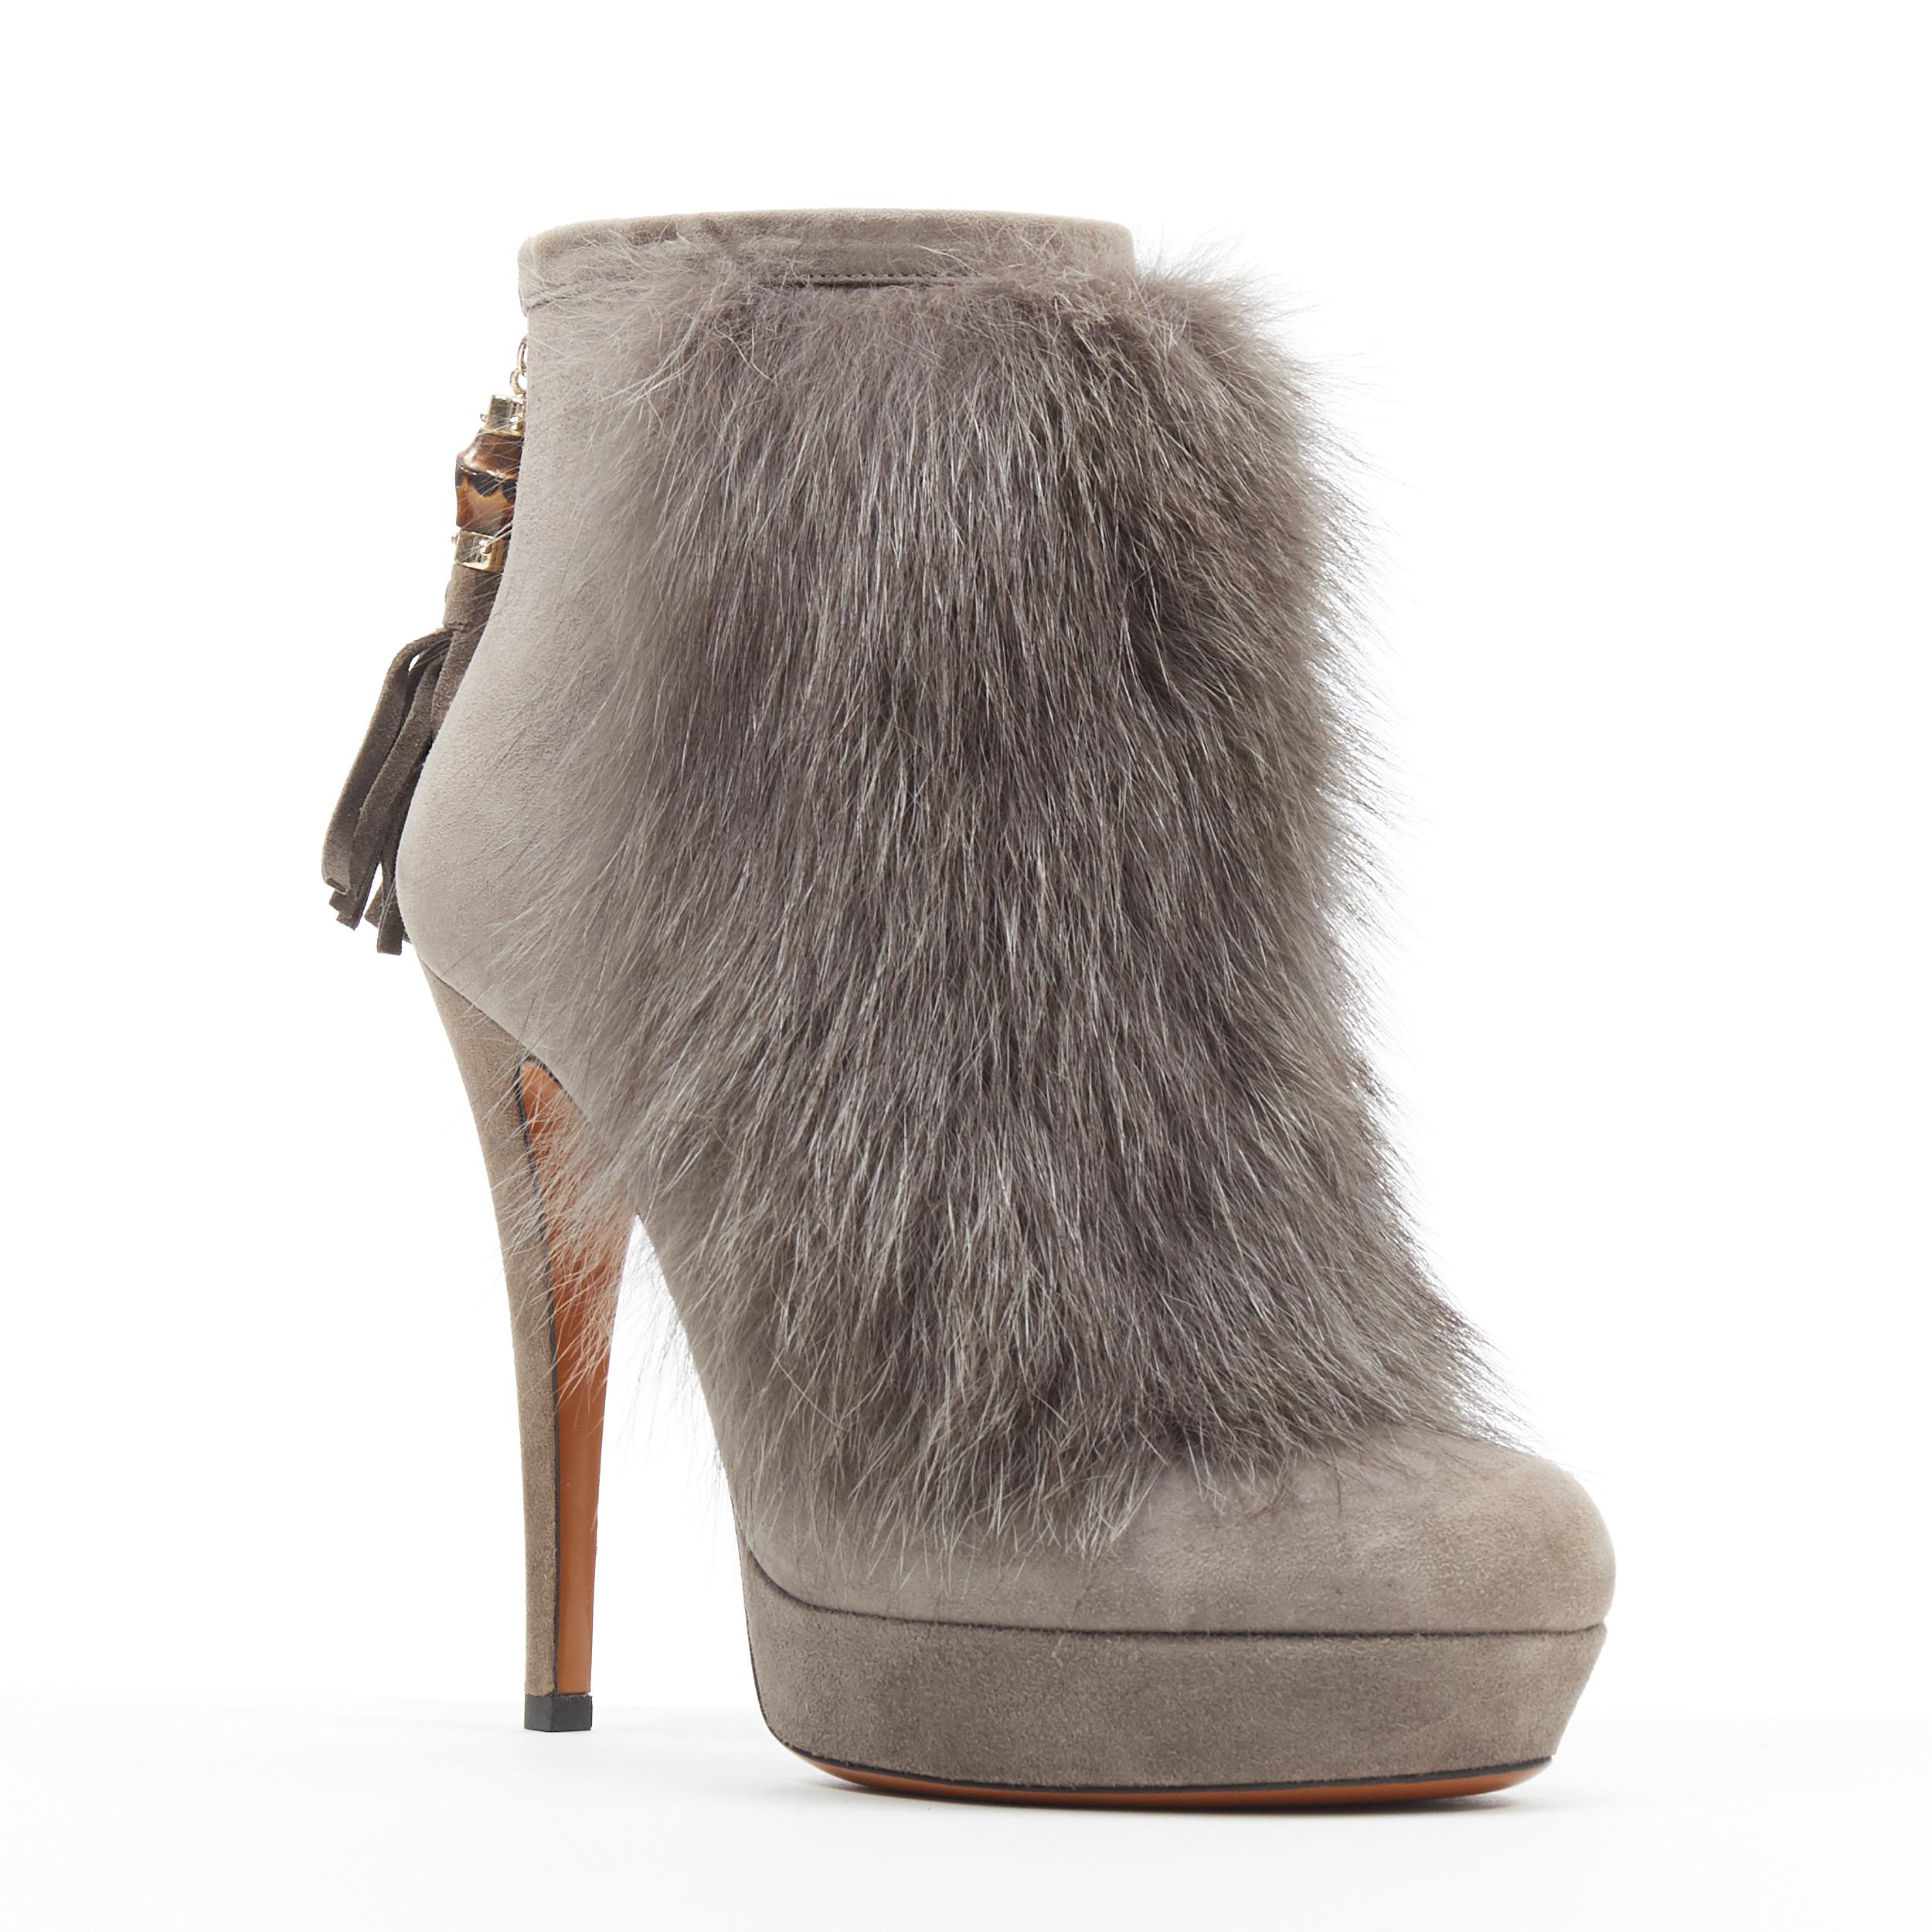 new GUCCI grey suede genuine fur bamboo tassel platform ankle bootie EU36
Brand: Gucci
Model Name / Style: Fur bootie
Material: Suede
Color: Grey
Pattern: Solid
Closure: Zip
Extra Detail: Genuine fur front. Grey suede upper. Bamboo and suede tassel